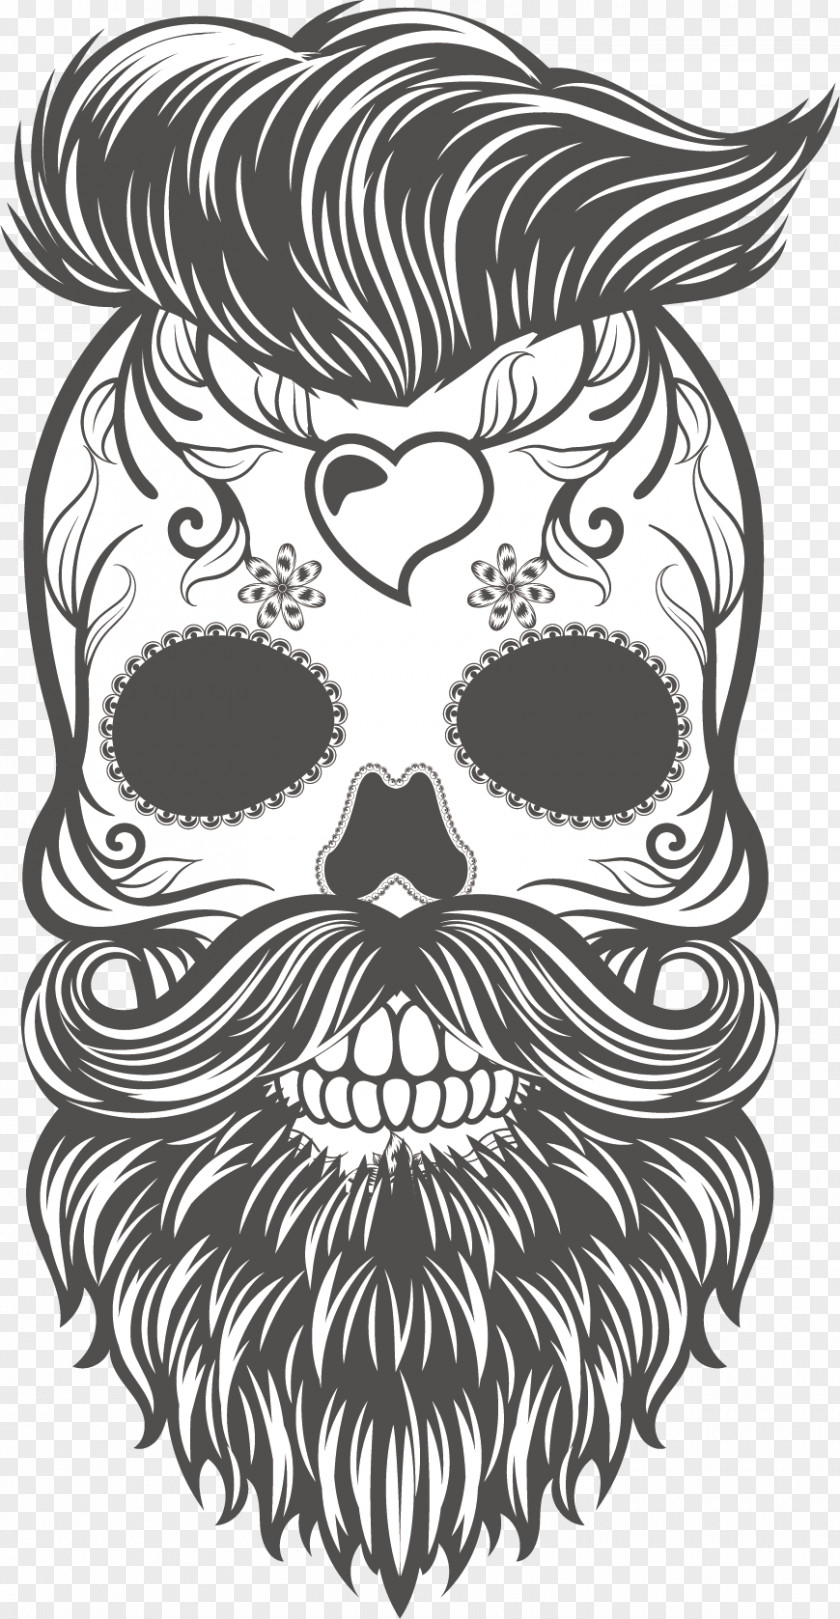 Vector Hand Painted Black And White Skull Calavera Hipster Beard Sticker PNG